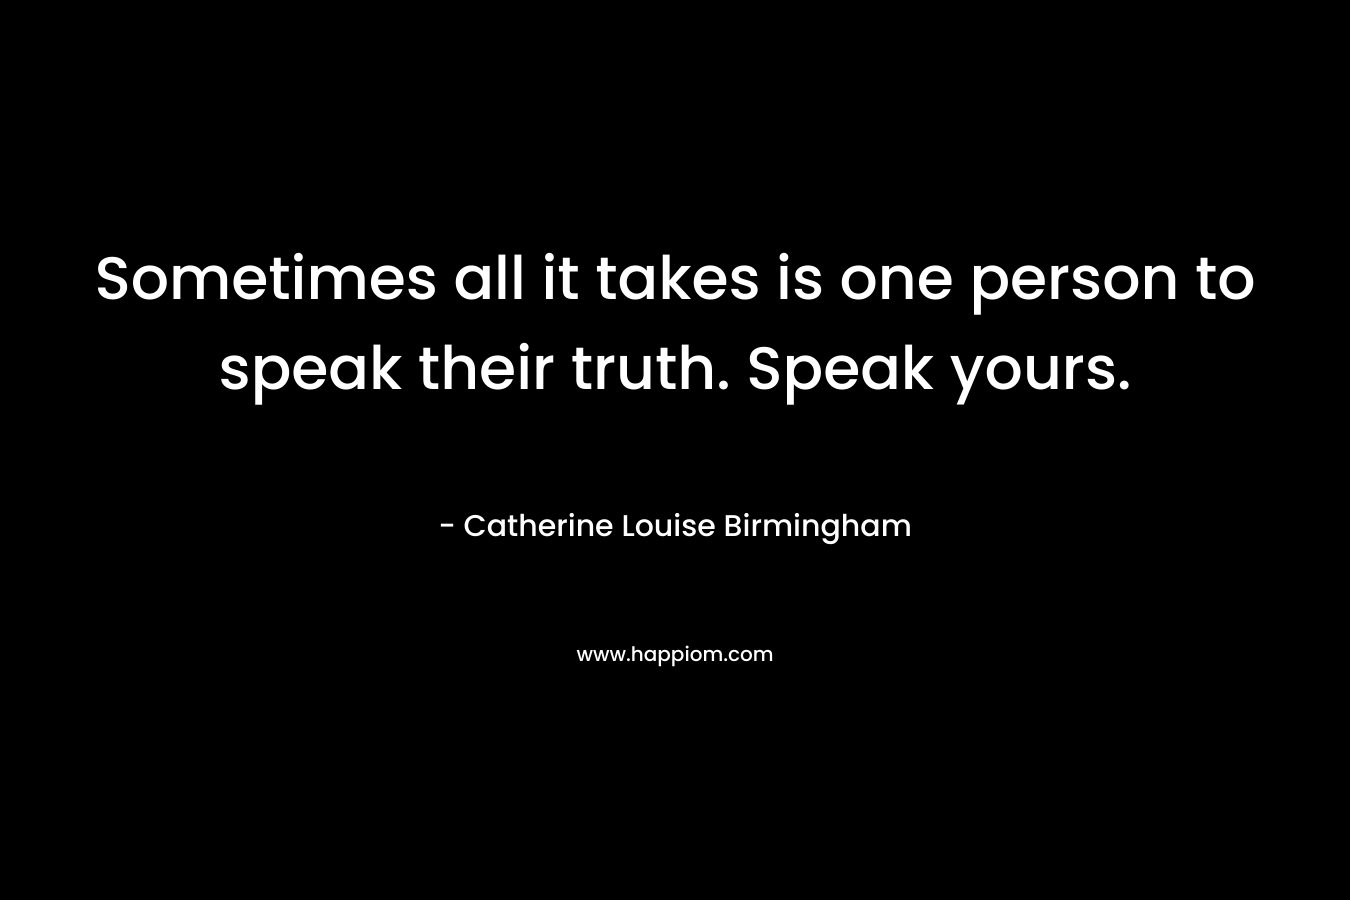 Sometimes all it takes is one person to speak their truth. Speak yours. – Catherine Louise Birmingham